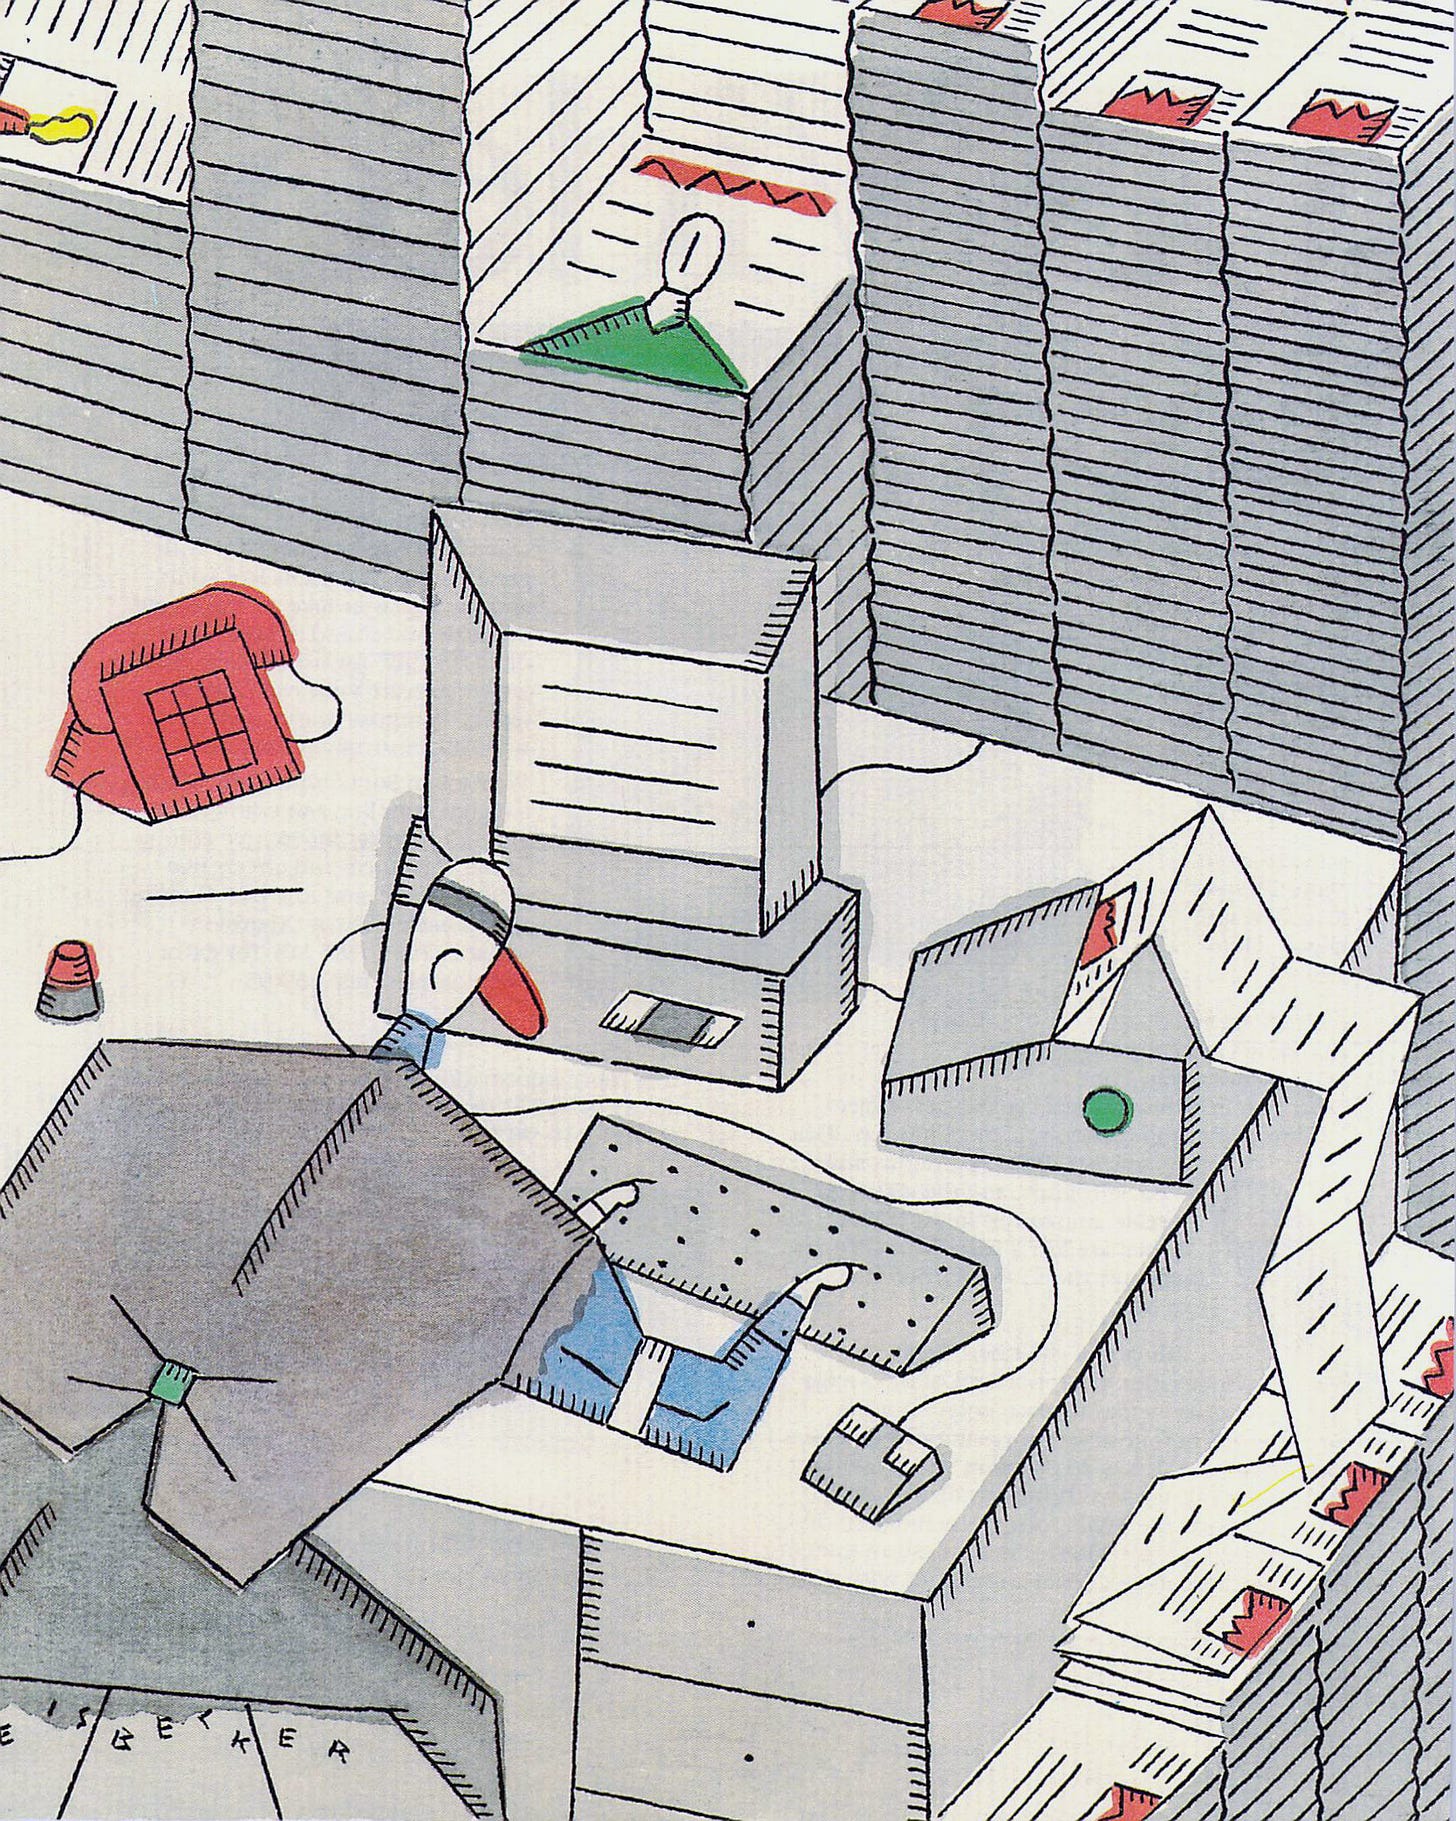 Phillippe Weisbecker, Illustration from the article "To Have and Have Not" in AmigaWorld, Jan 1988